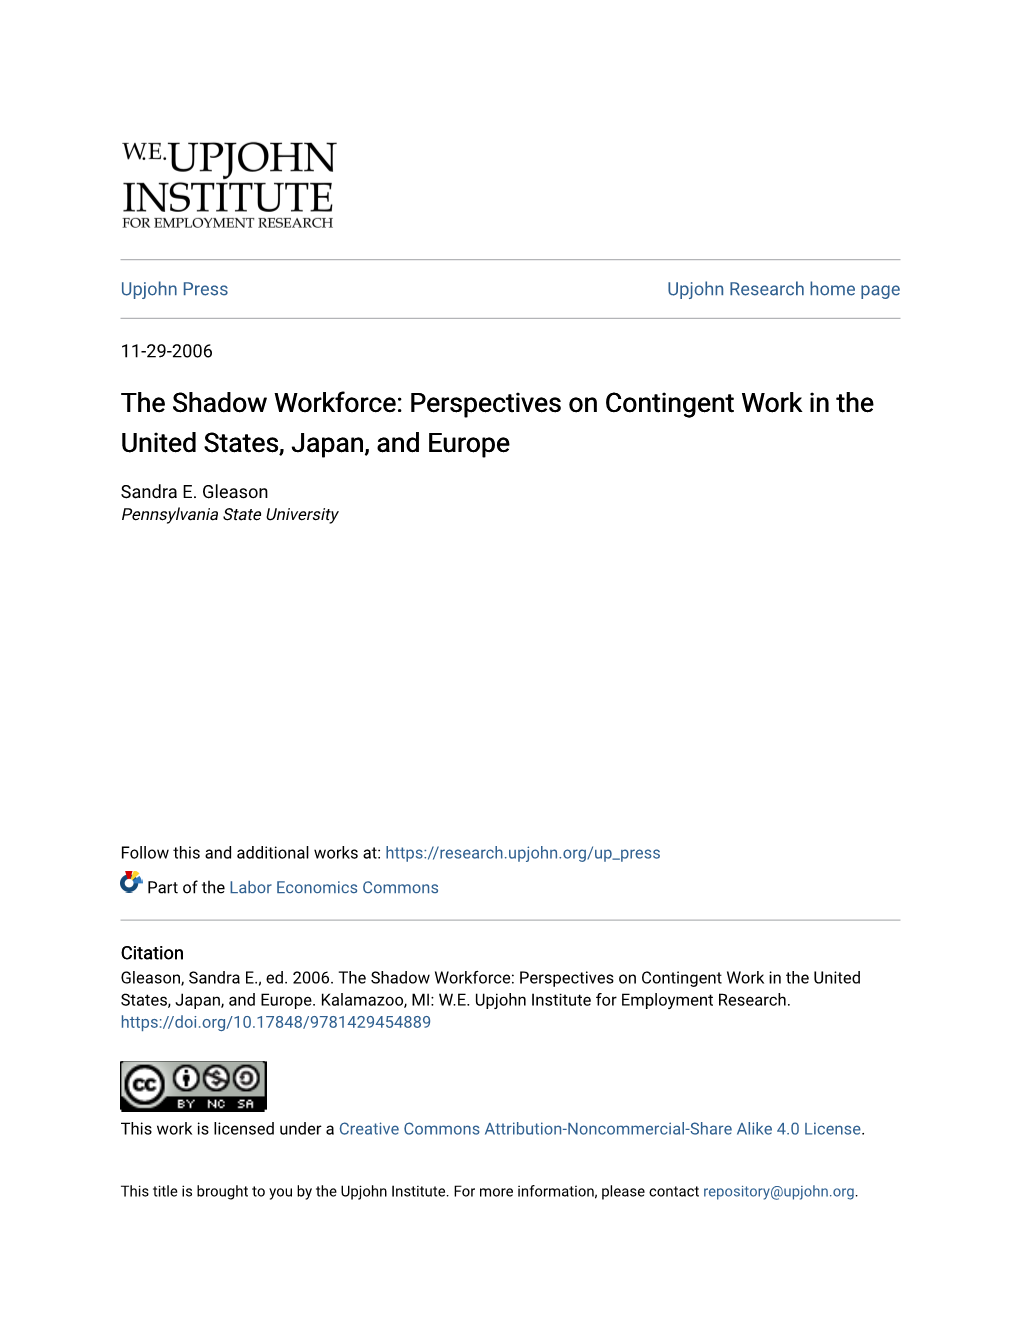 The Shadow Workforce: Perspectives on Contingent Work in the United States, Japan, and Europe